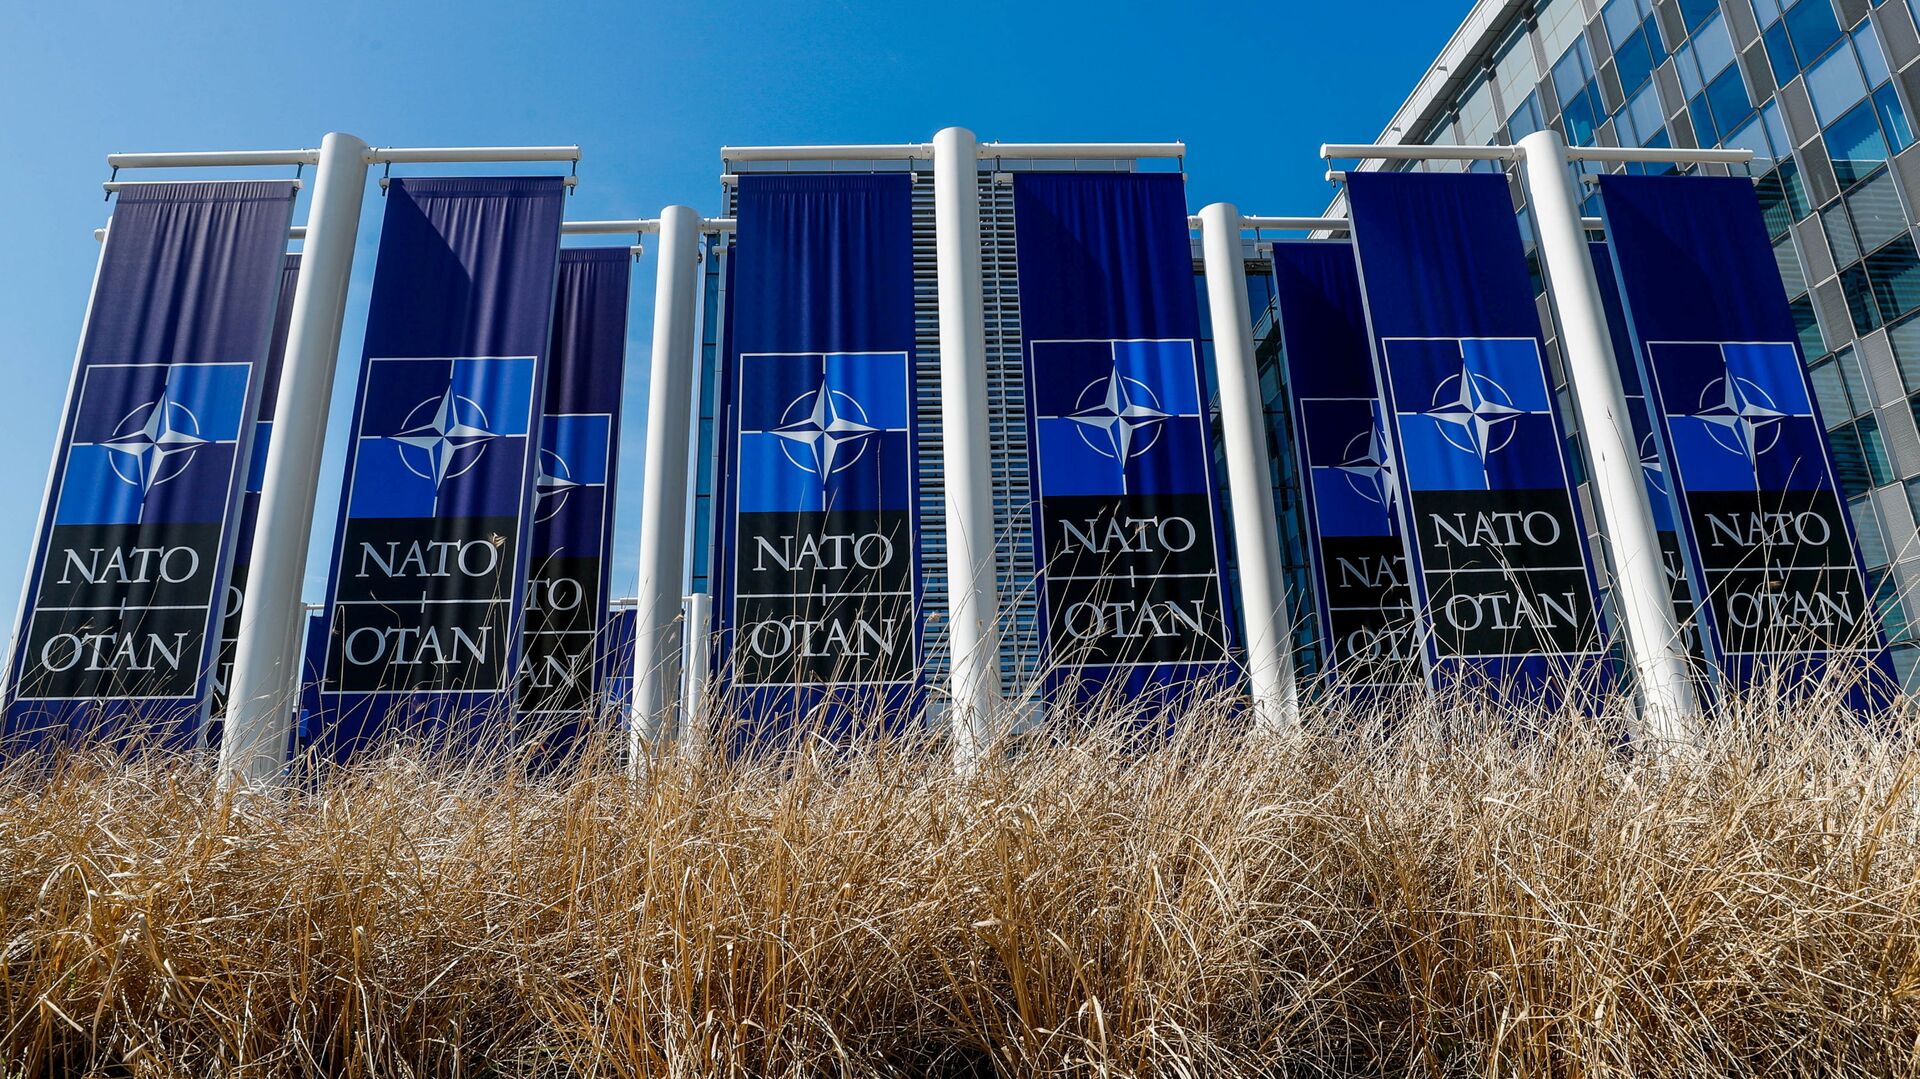 FILE PHOTO: Banners displaying the NATO logo are placed at the entrance of new NATO headquarters during the move to the new building, in Brussels, Belgium April 19, 2018.  REUTERS/Yves Herman/File Photo - Sputnik International, 1920, 14.06.2021